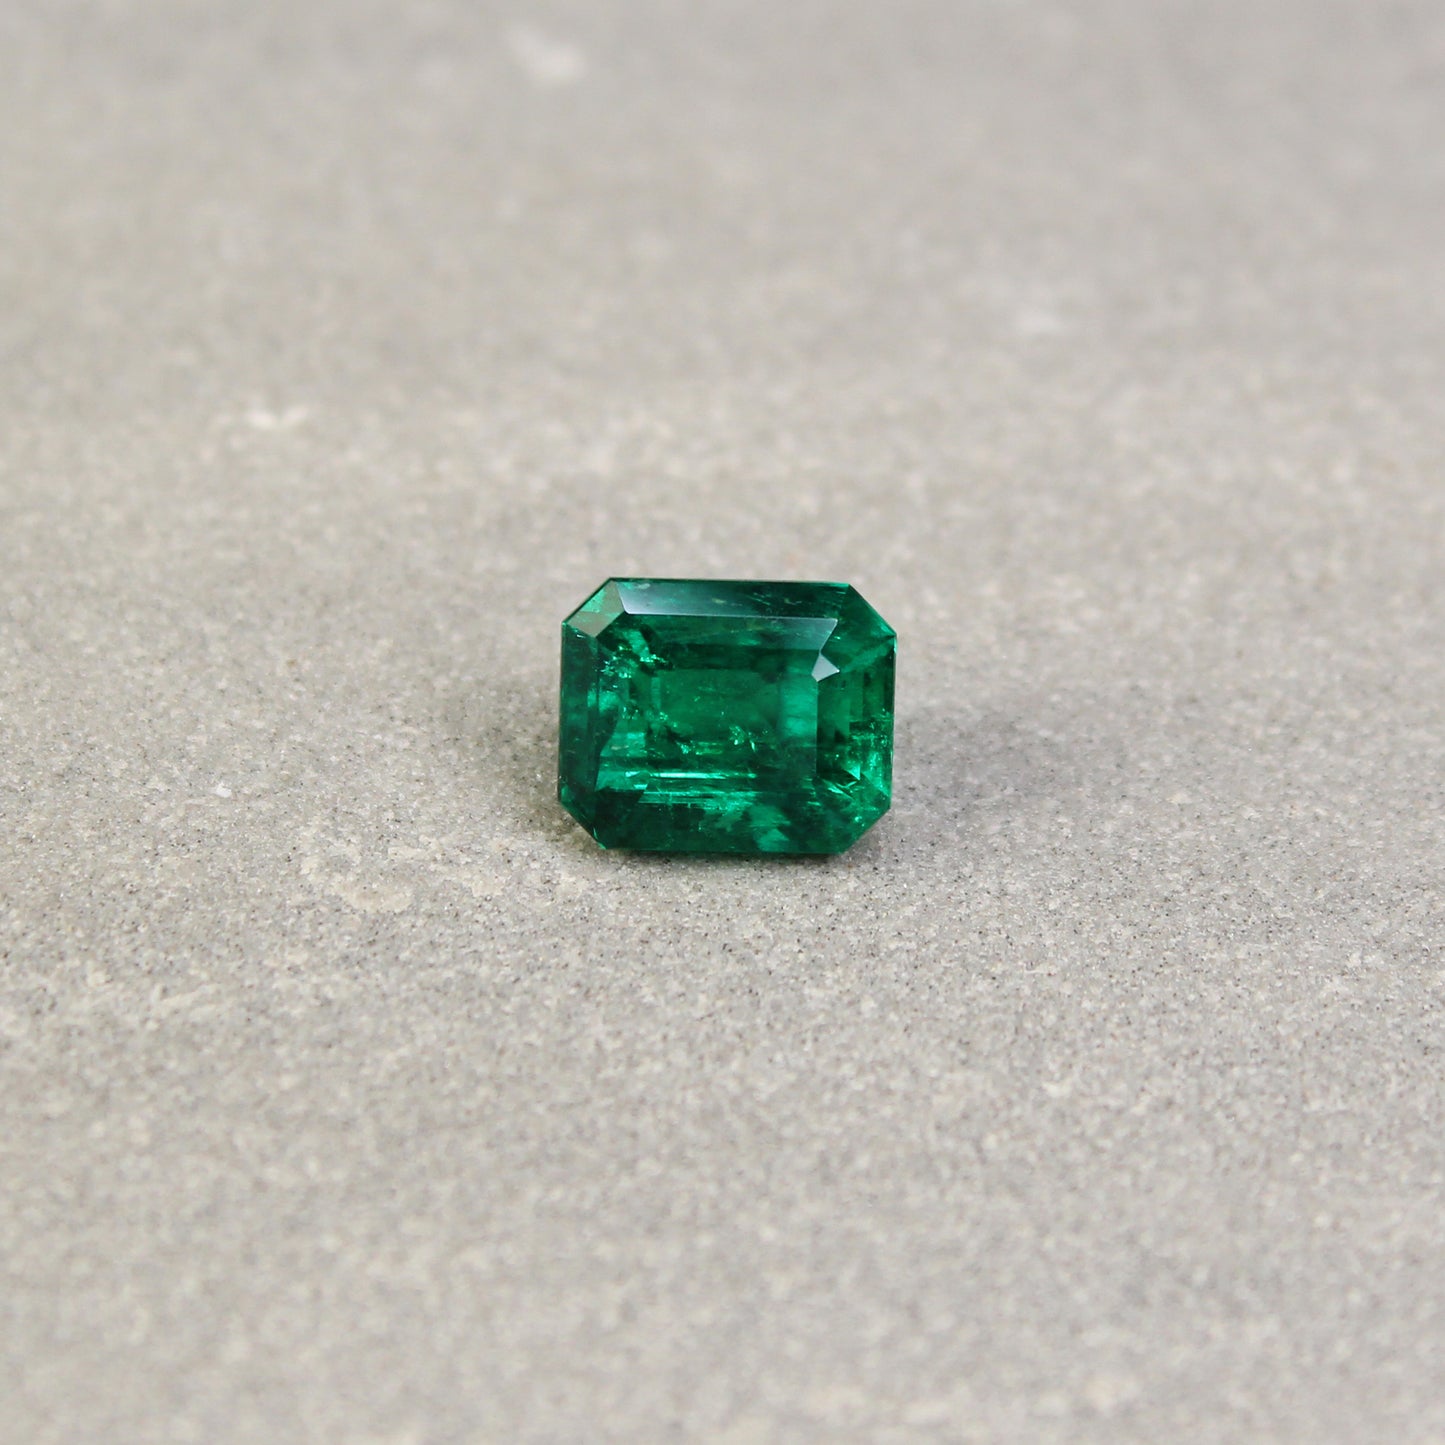 2.58ct Octagon Emerald, Moderate Oil, Afghanistan - 8.63 x 7.03 x 6.01mm